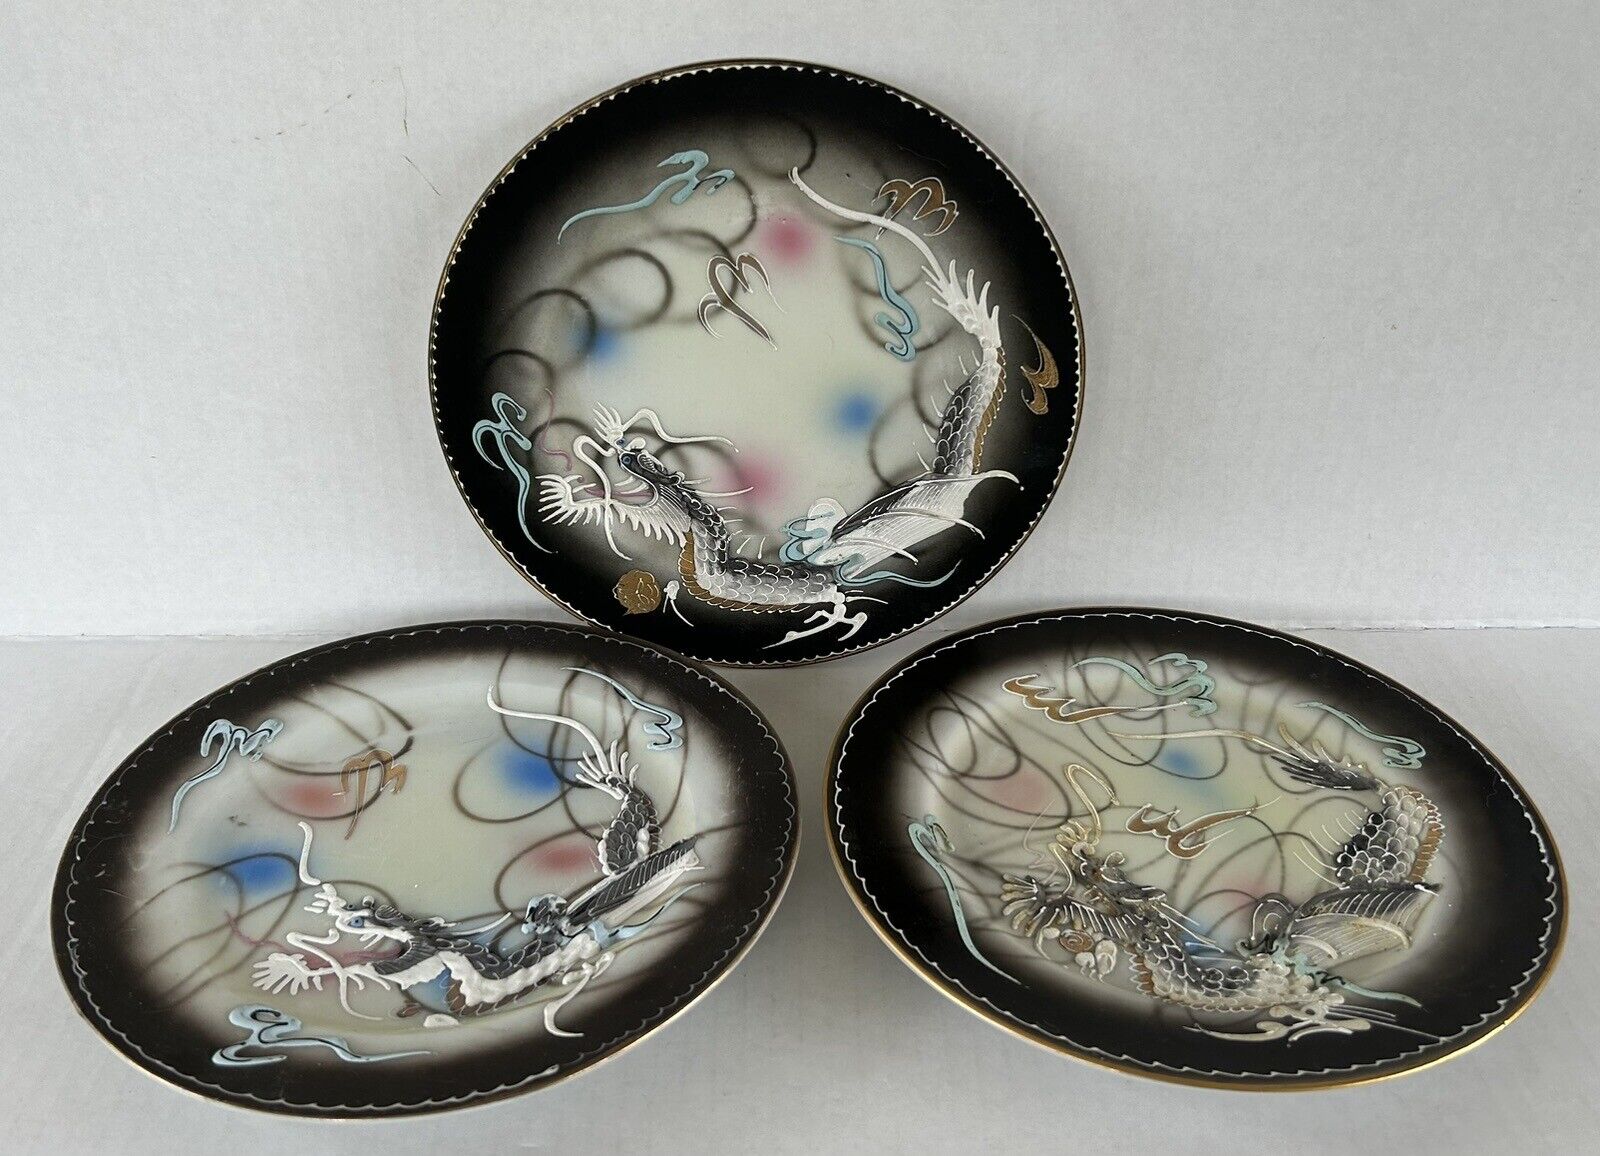 Vintage Moriage Dragonware Plates (3) Hand Painted Nippon Dragon Pottery Japan